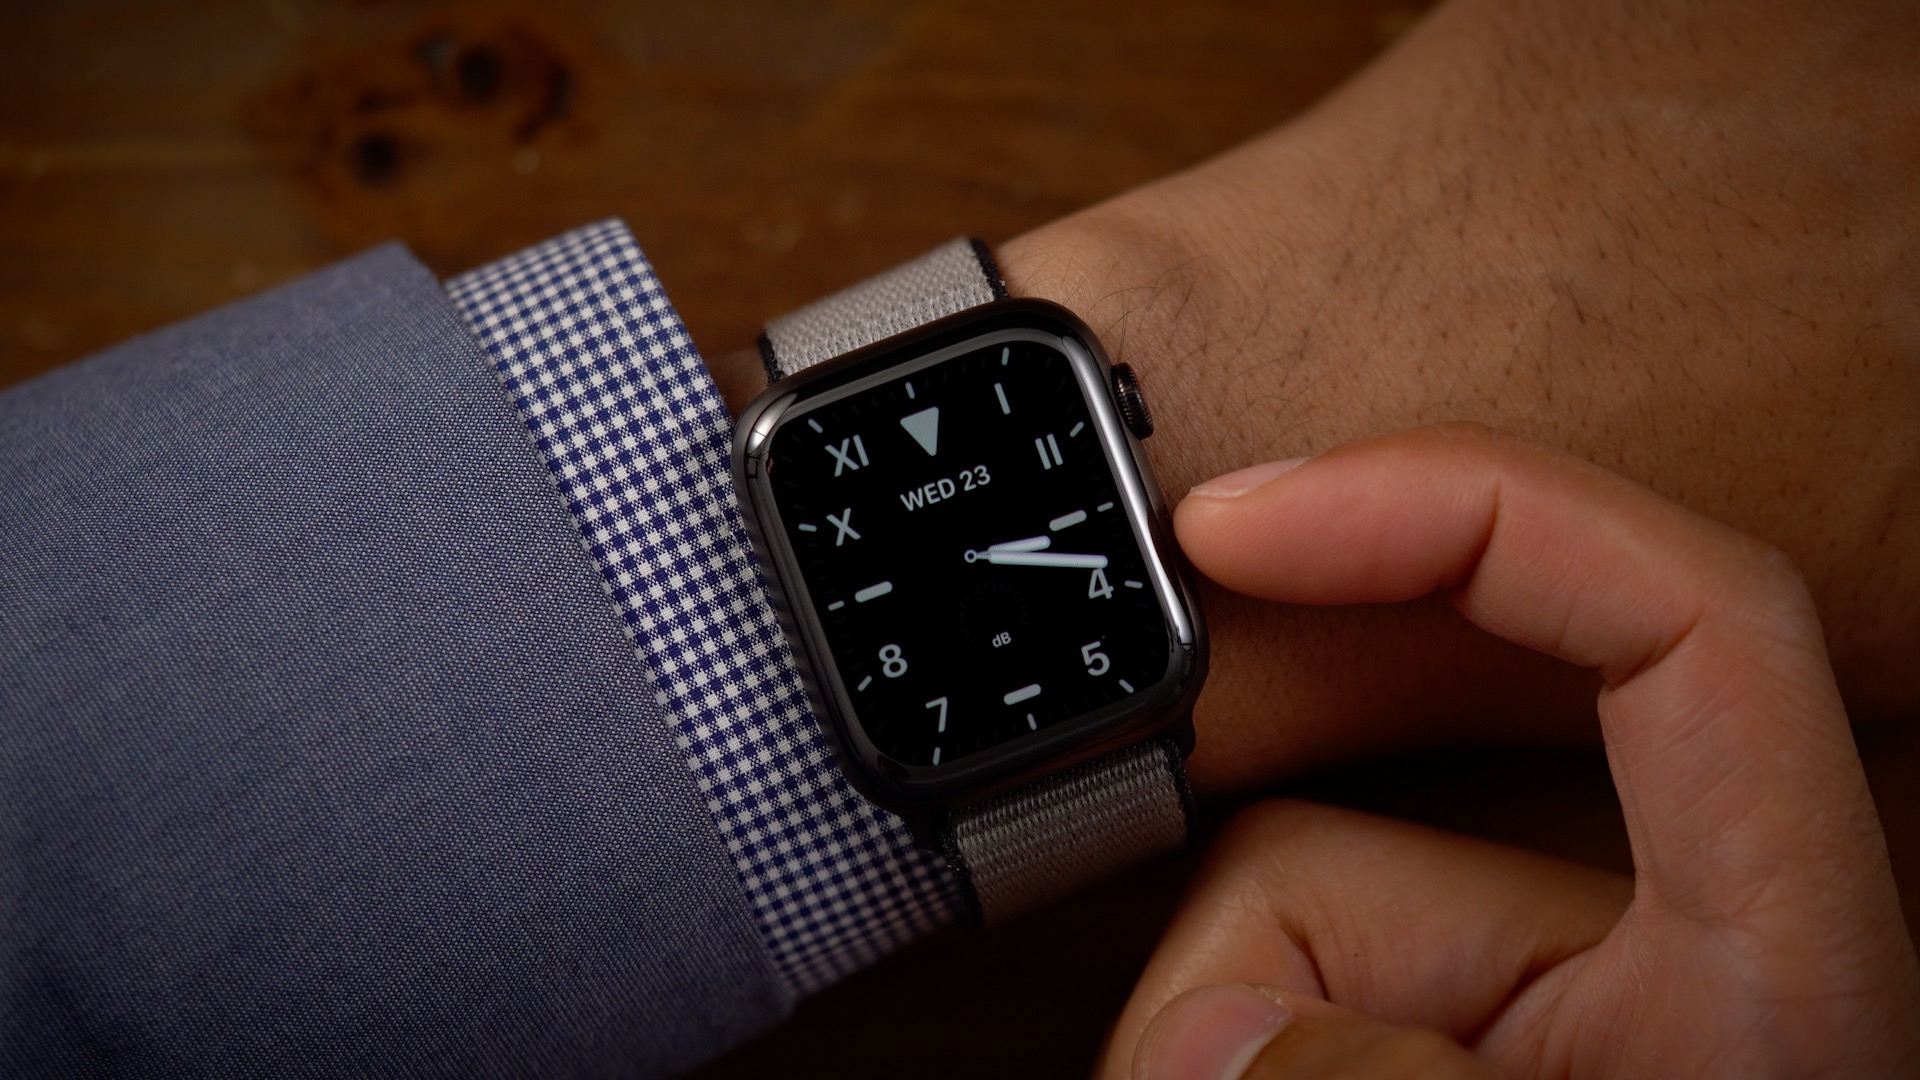 Apple Watch Series 5 video review the alwayson display is a key feature